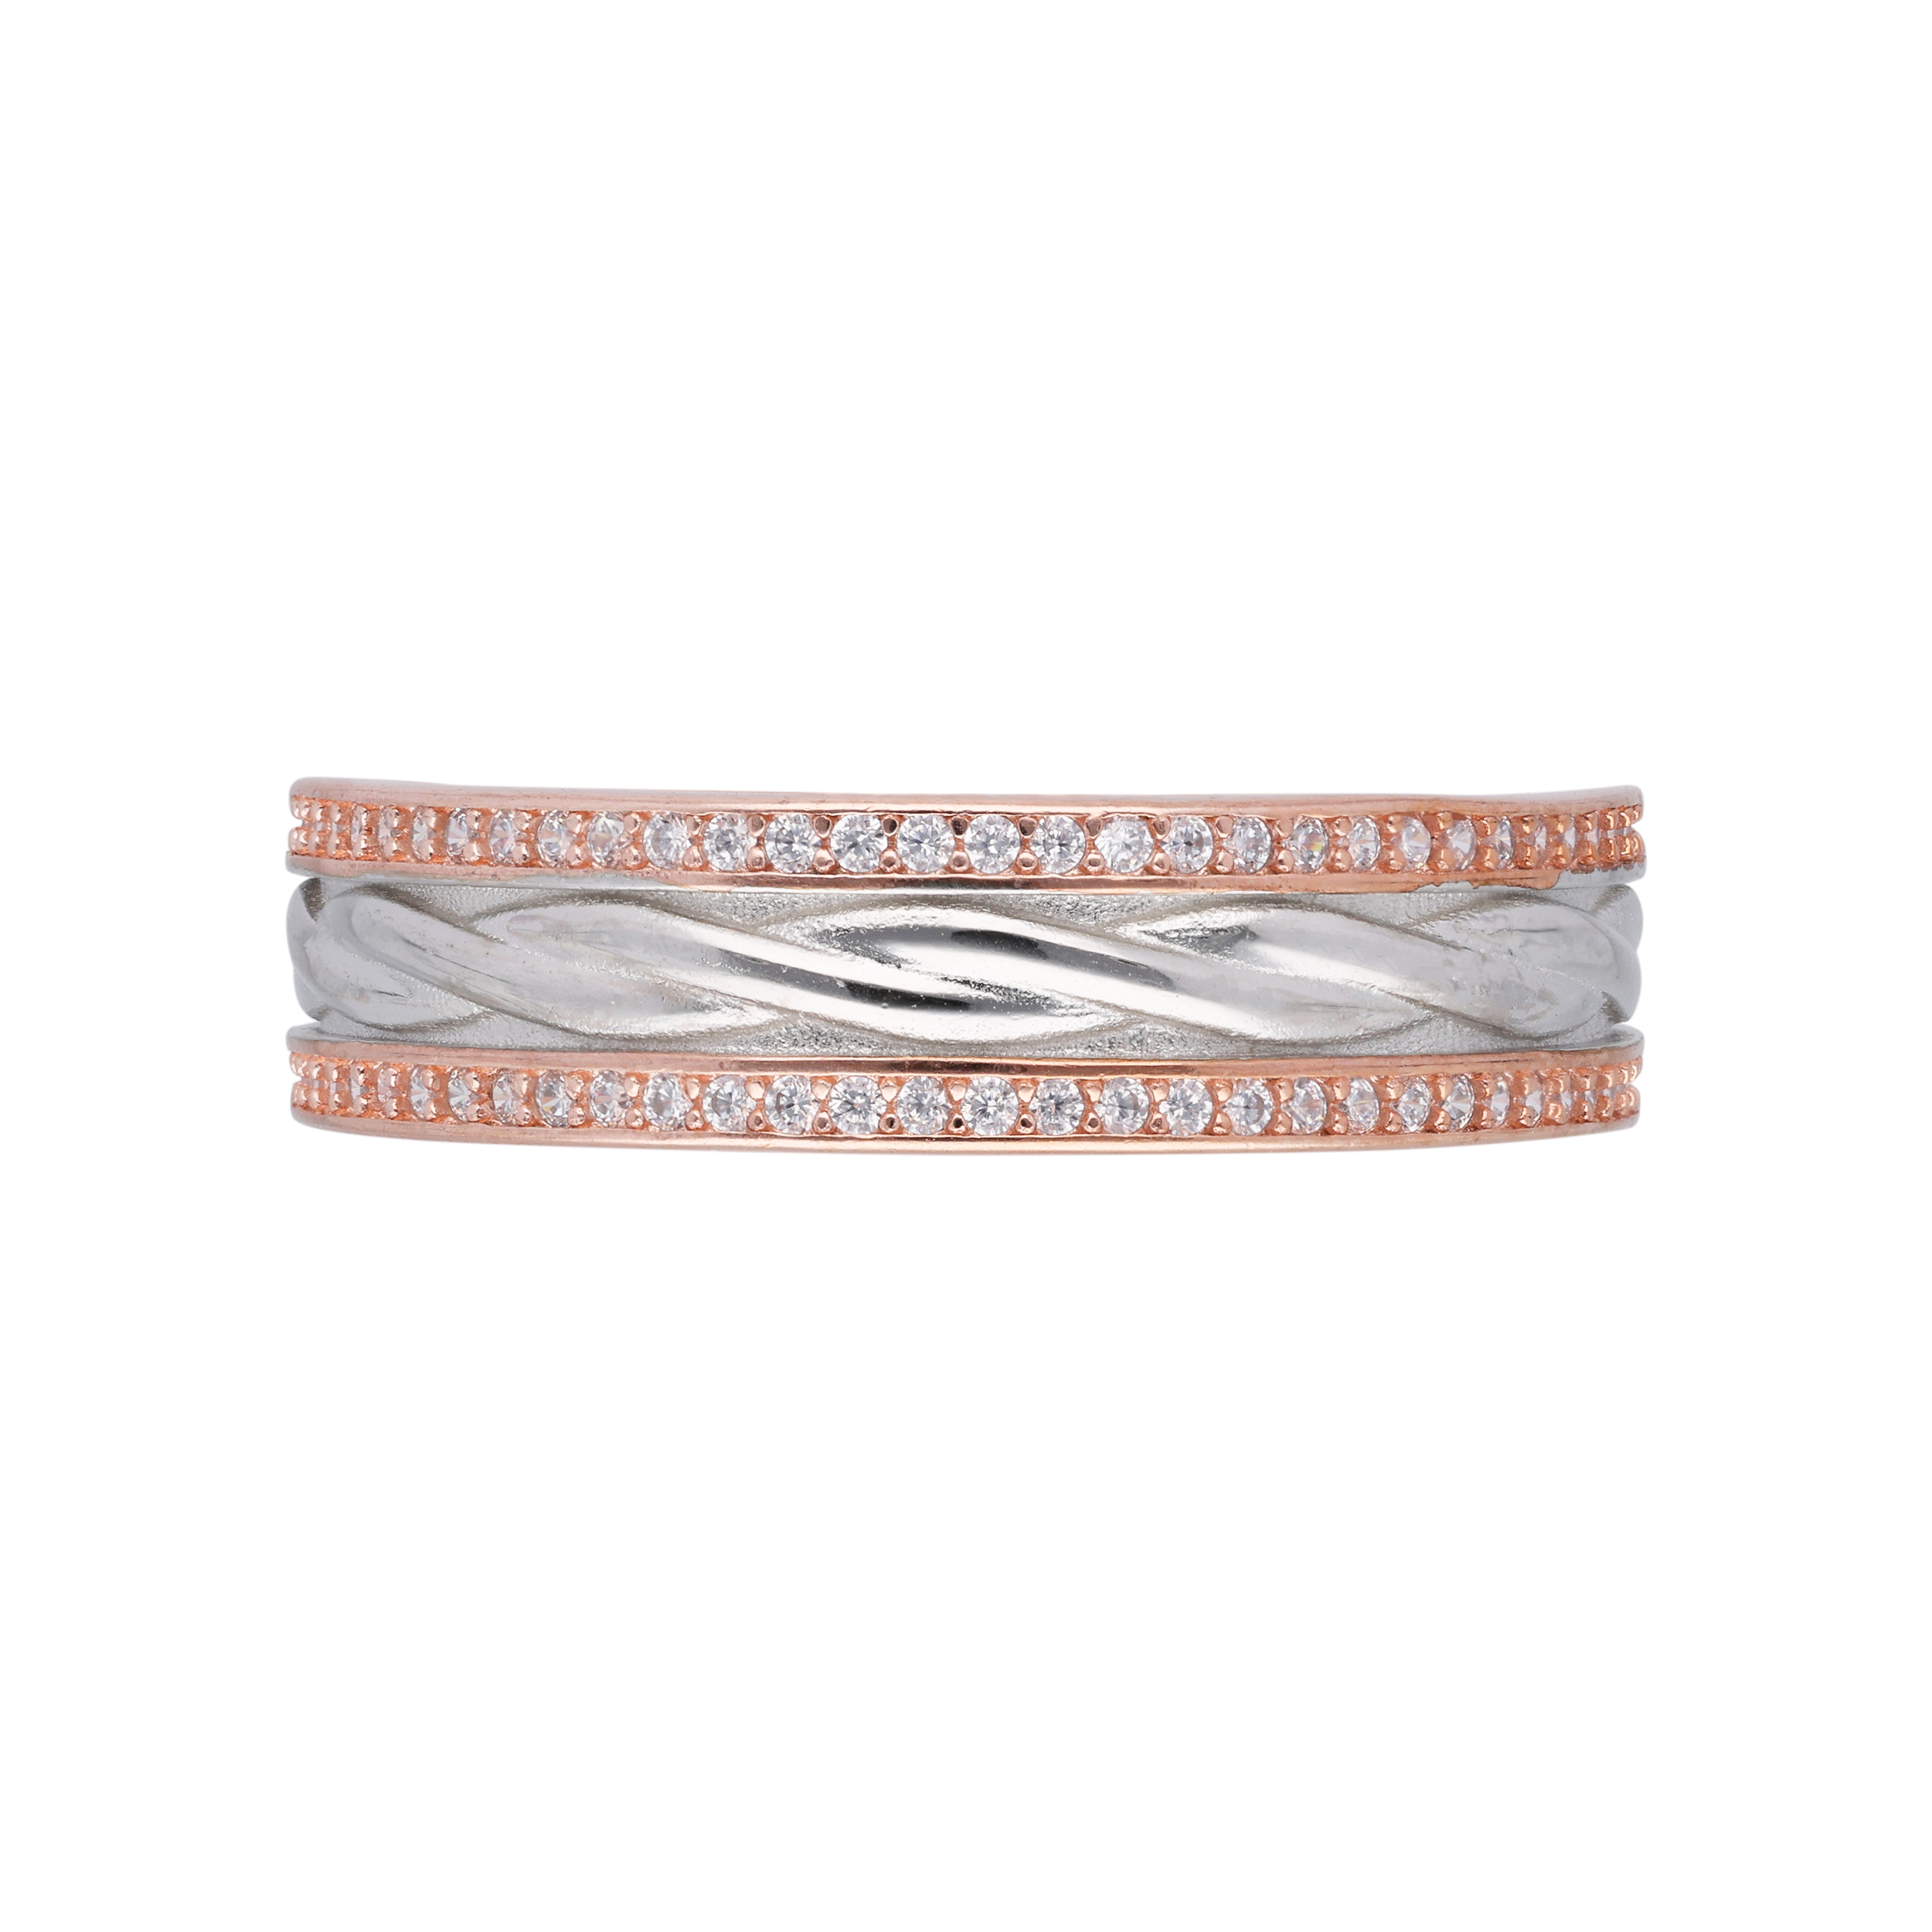 Contemporary Classic: Men's Sterling Silver Band Ring | SKU: 0019767895, 0019767918, 0019767925, 0019767932, 0019767901